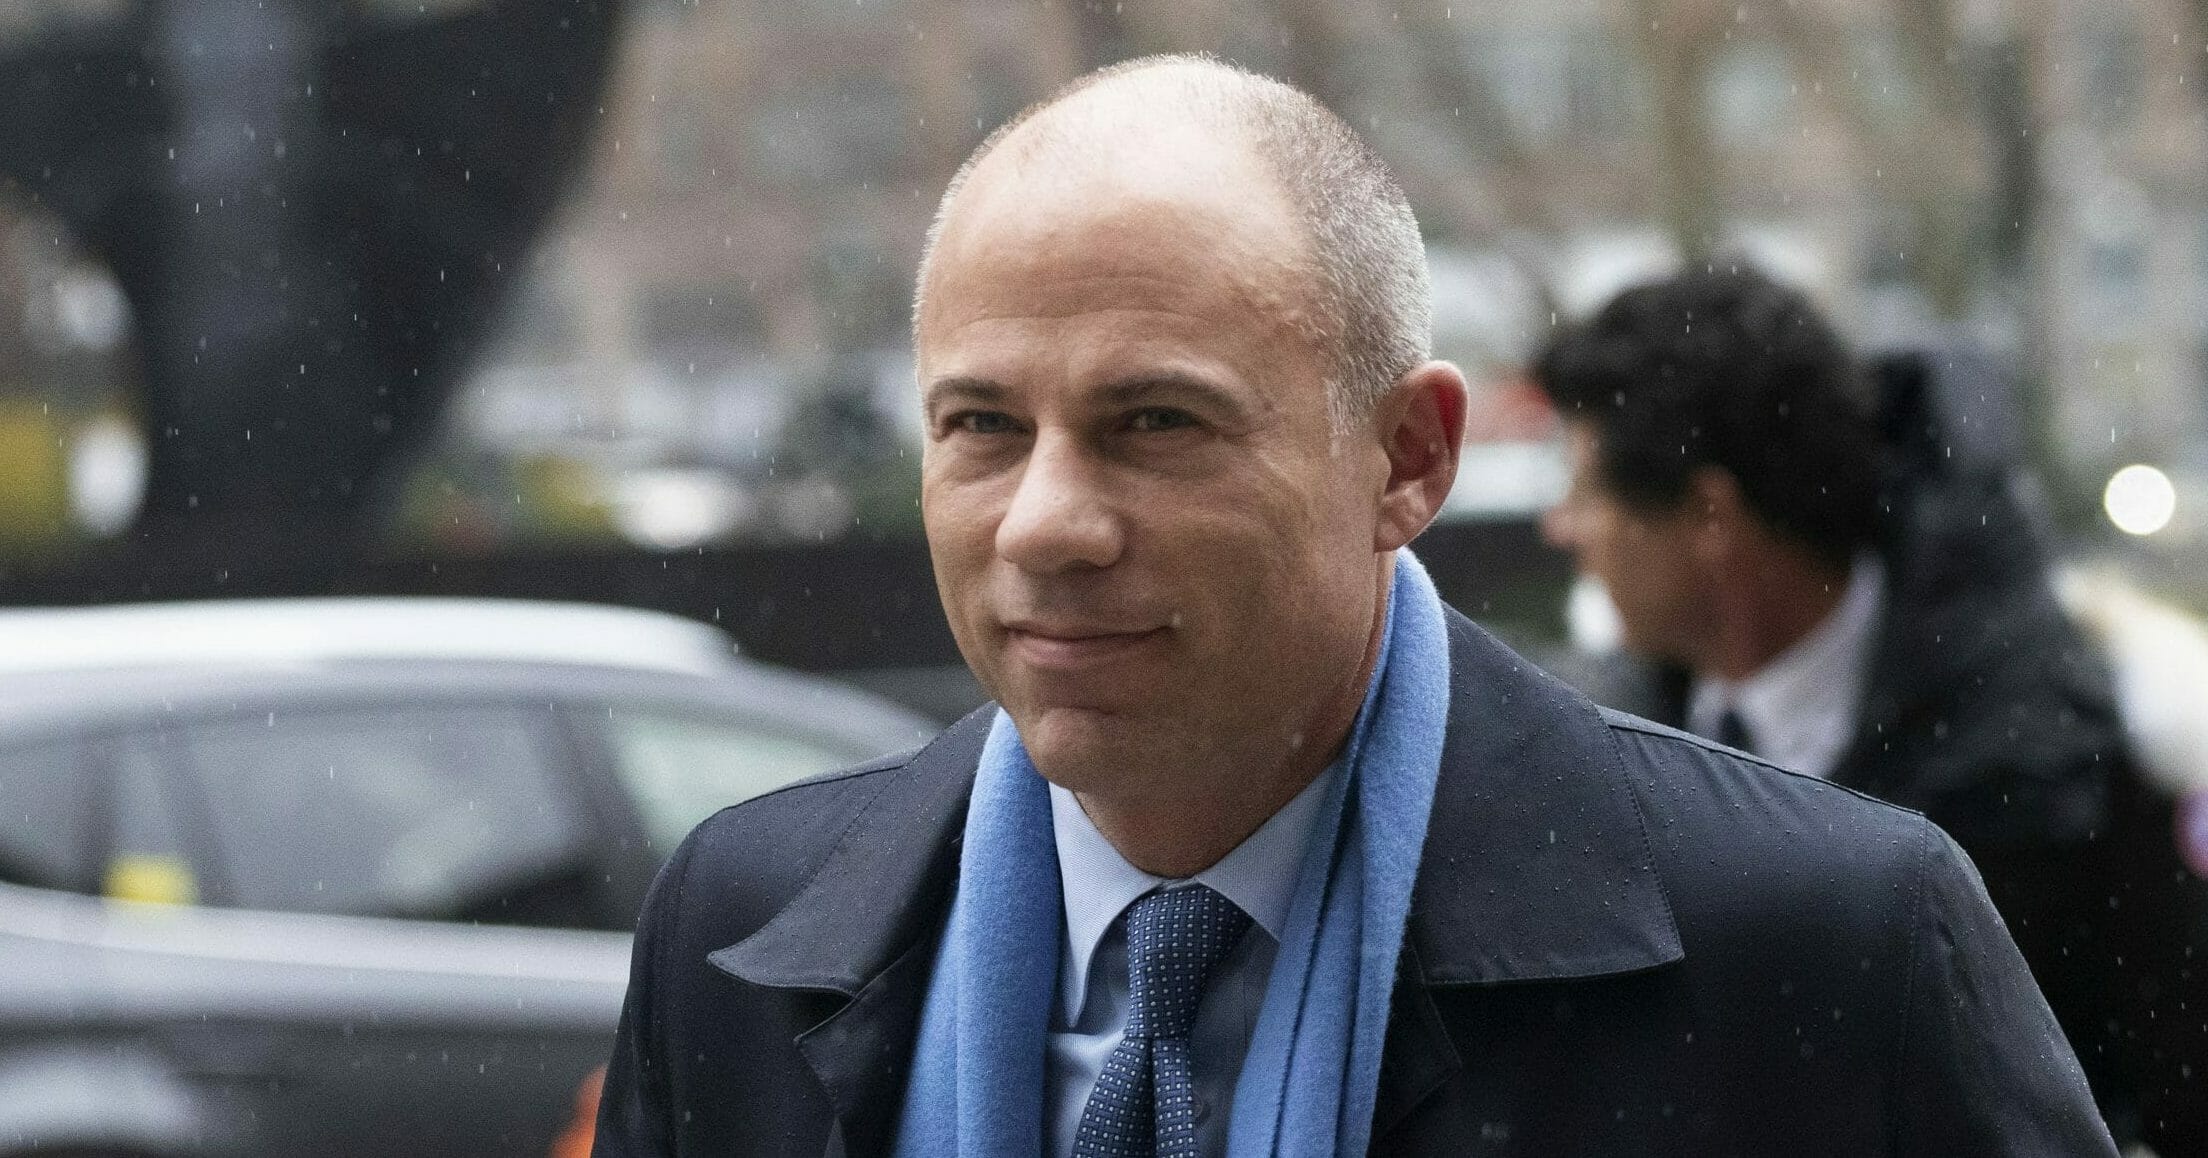 Michael Avenatti arrives at federal court in New York on Dec. 17, 2019.